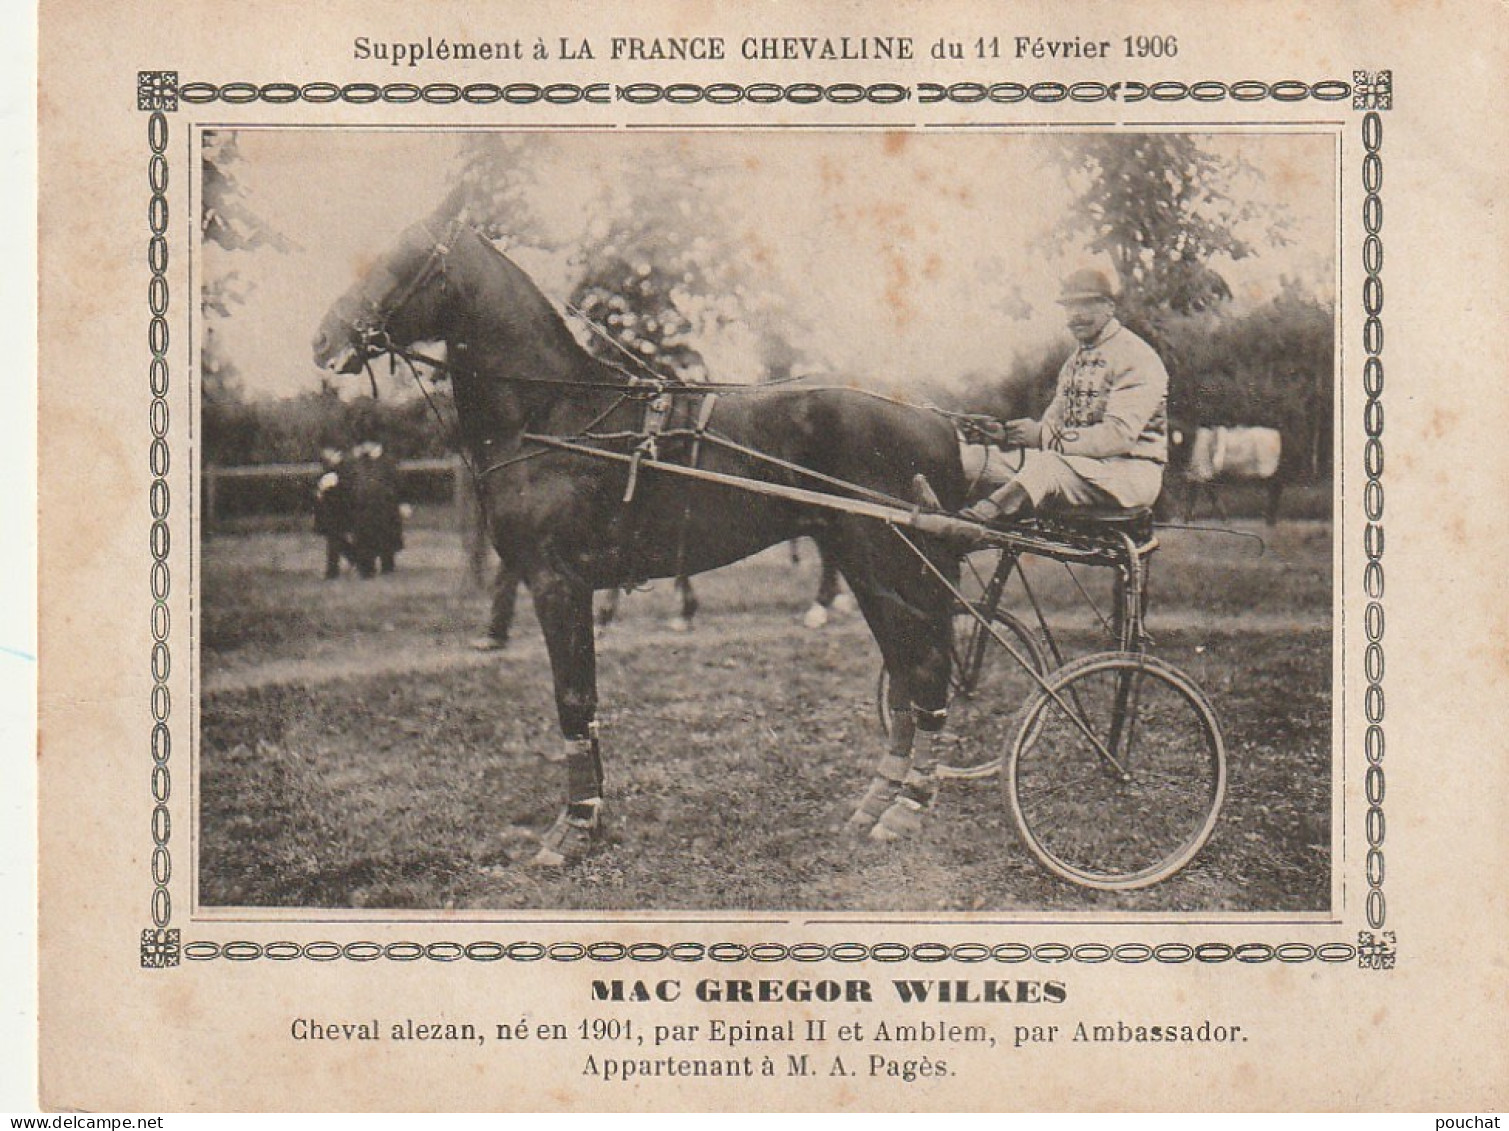 AA+ - " MAC GREGOR WILKES " - CHEVAL ALEZAN APPARTENANT A M. A. PAGES - SUPPL. " FRANCE CHEVALINE " , FEV. 1906 - SULKY - Paardensport